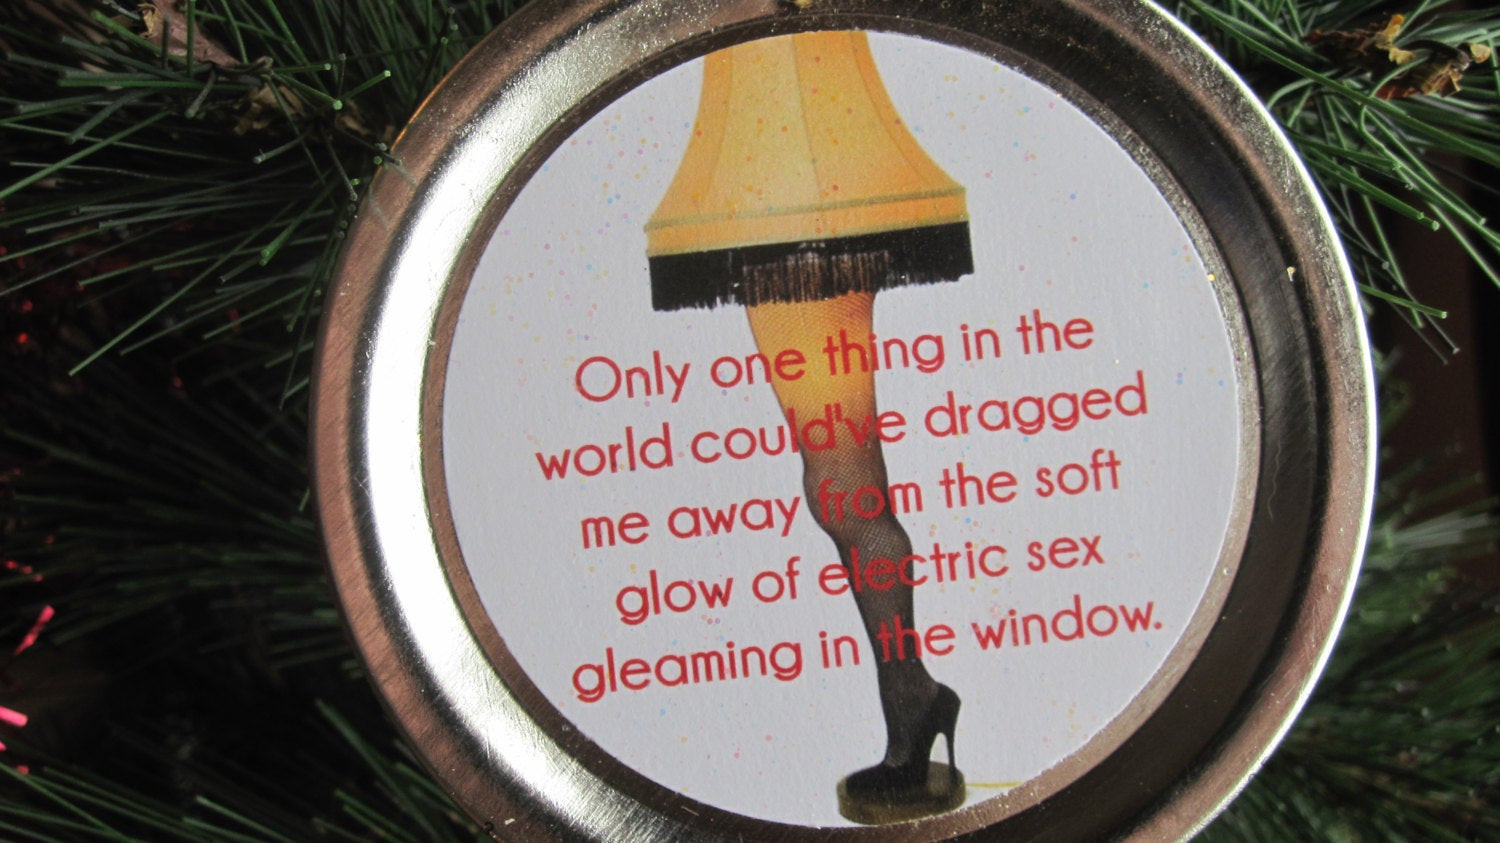 Christmas Story Lamp Quote
 A Christmas Story Ornament Funny Movie Quote by